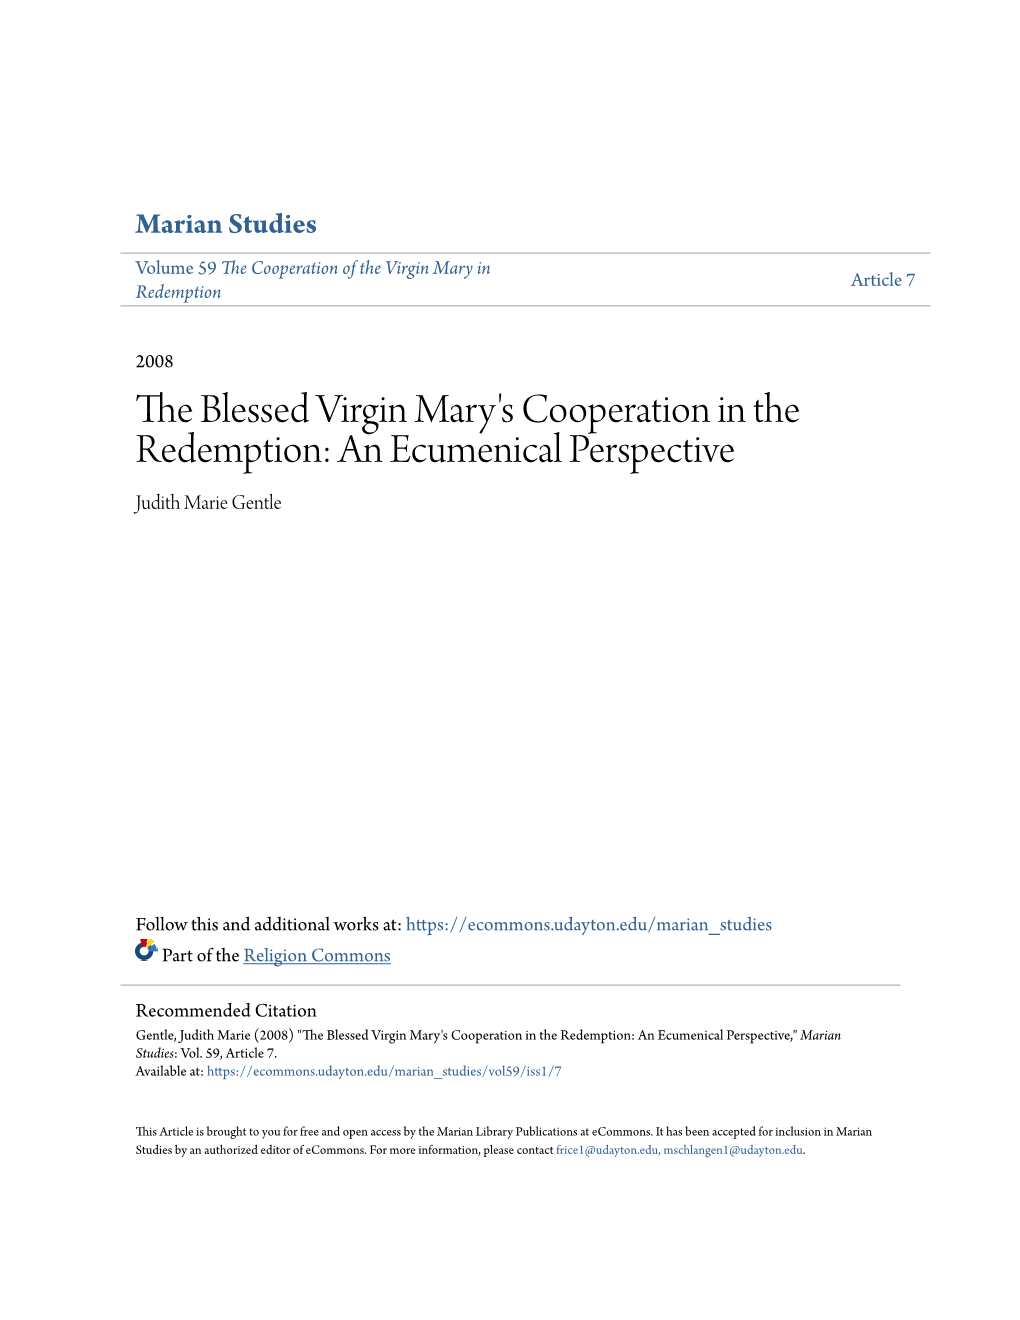 The Blessed Virgin Mary's Cooperation in the Redemption